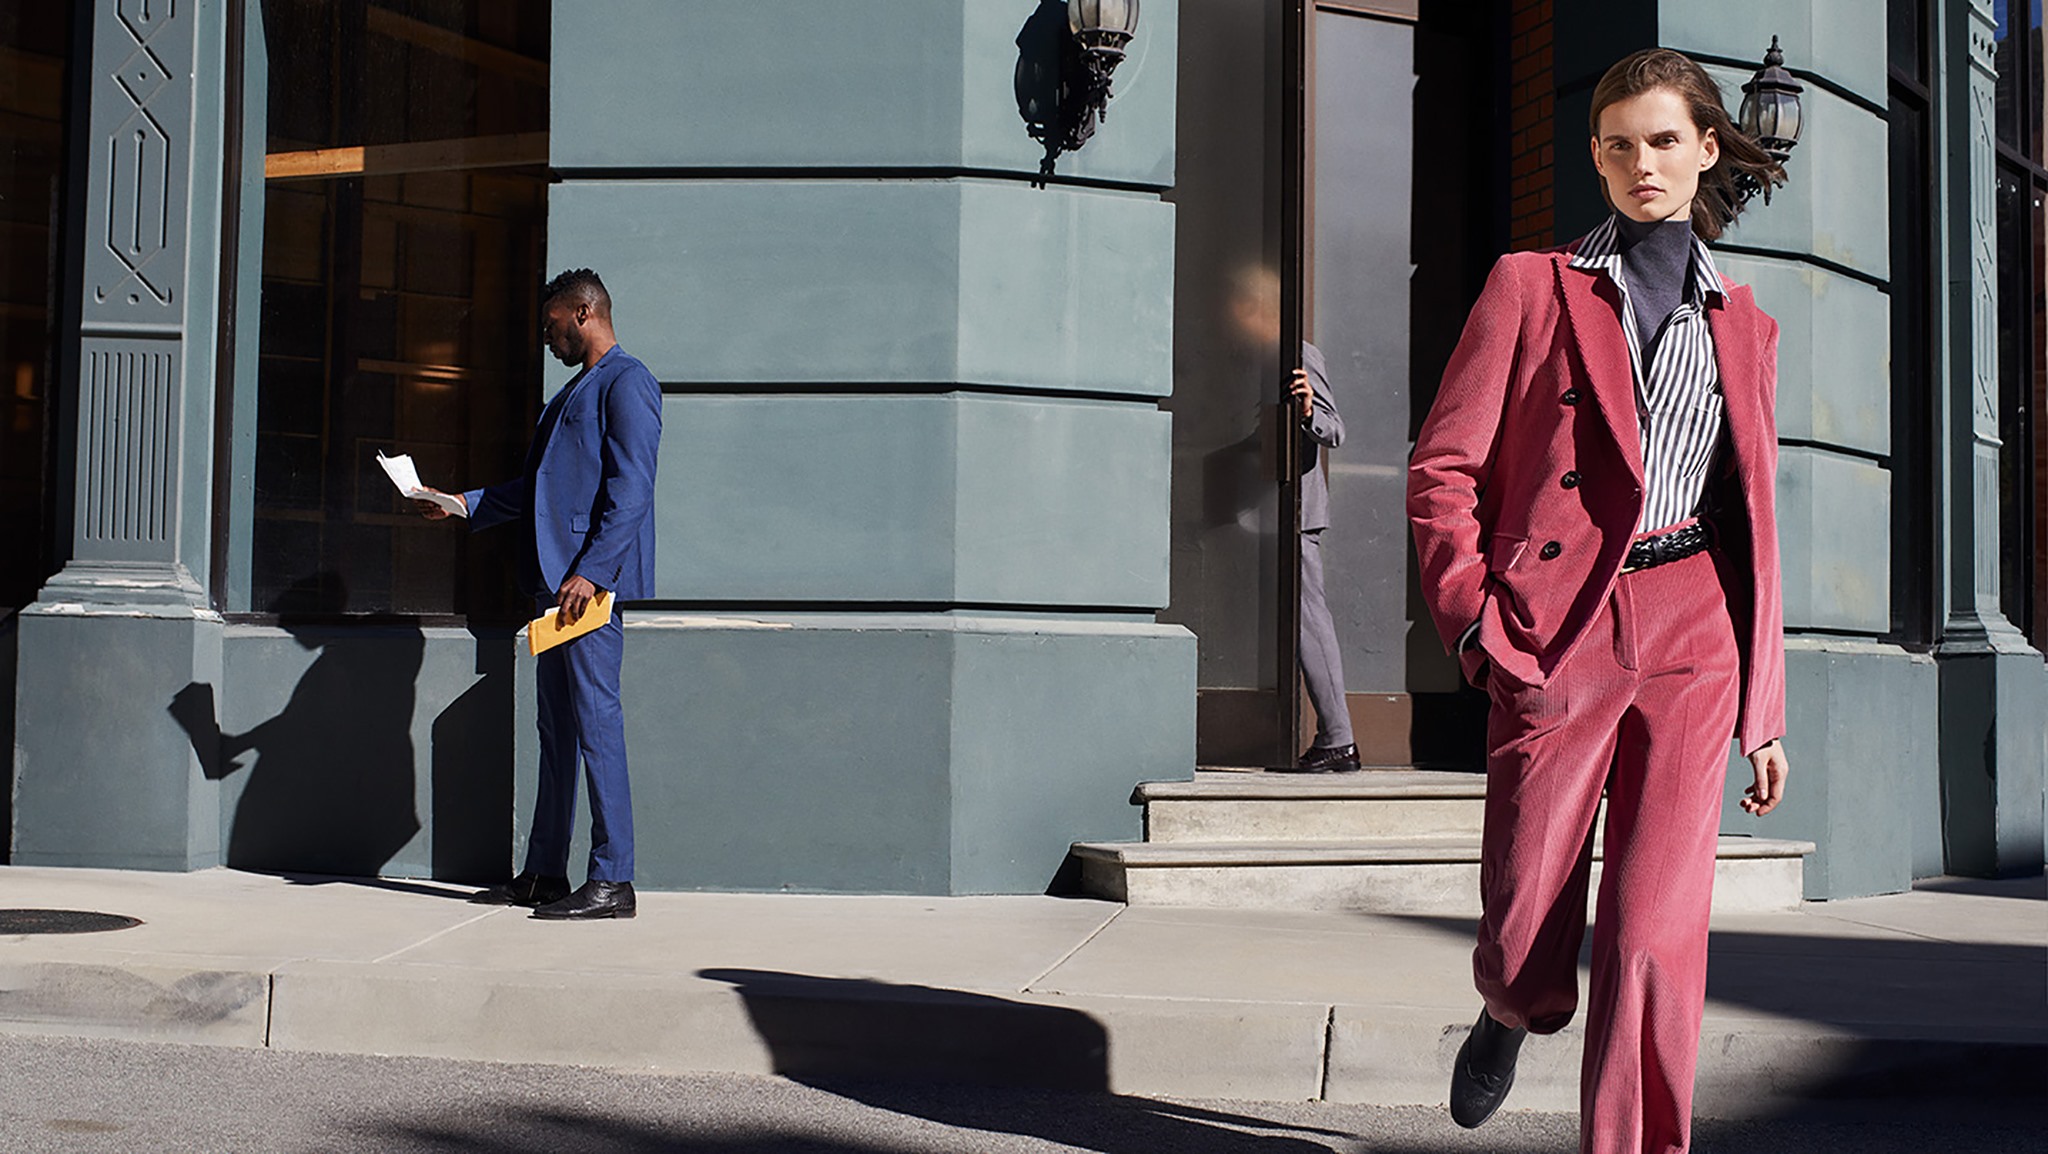 From the chic pink pantsuit redefining power dressing to impeccable coat, let a passion for travel infuse your every day with an ever-evolving wardrobe. Get yours on the move in-store and online now.